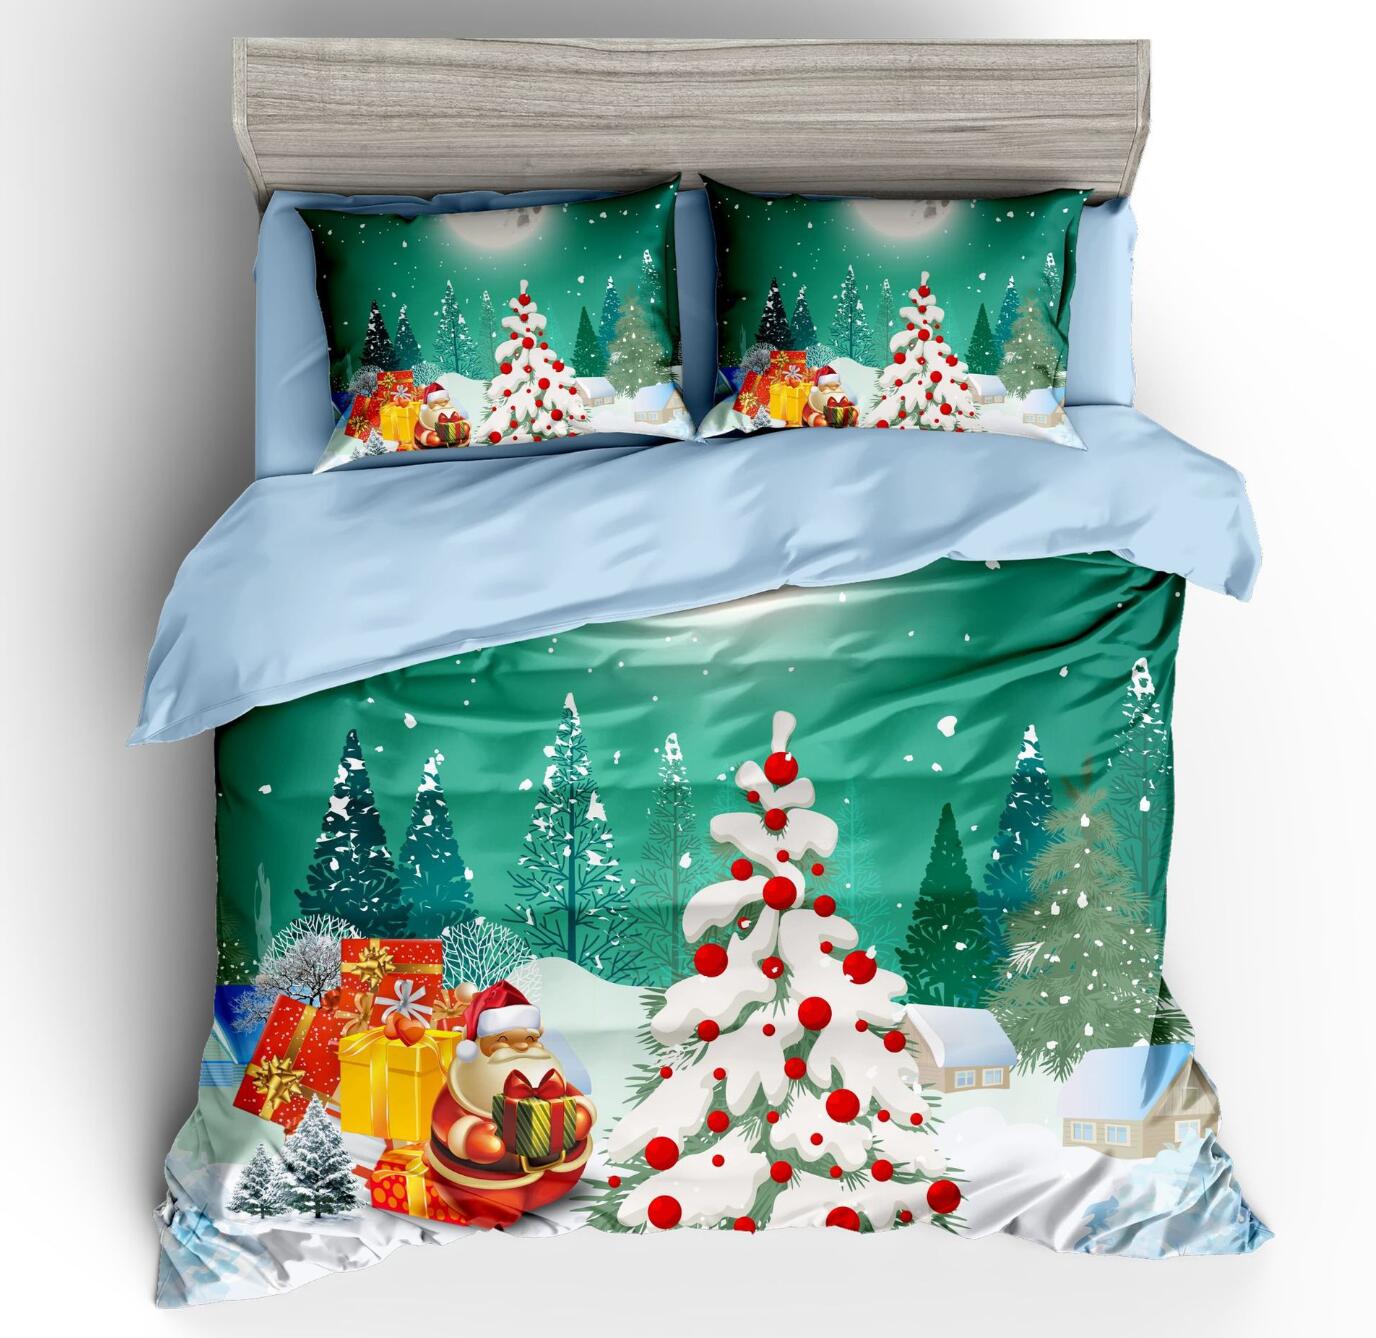 3D Snow Tree Gift 32149 Christmas Quilt Duvet Cover Xmas Bed Pillowcases